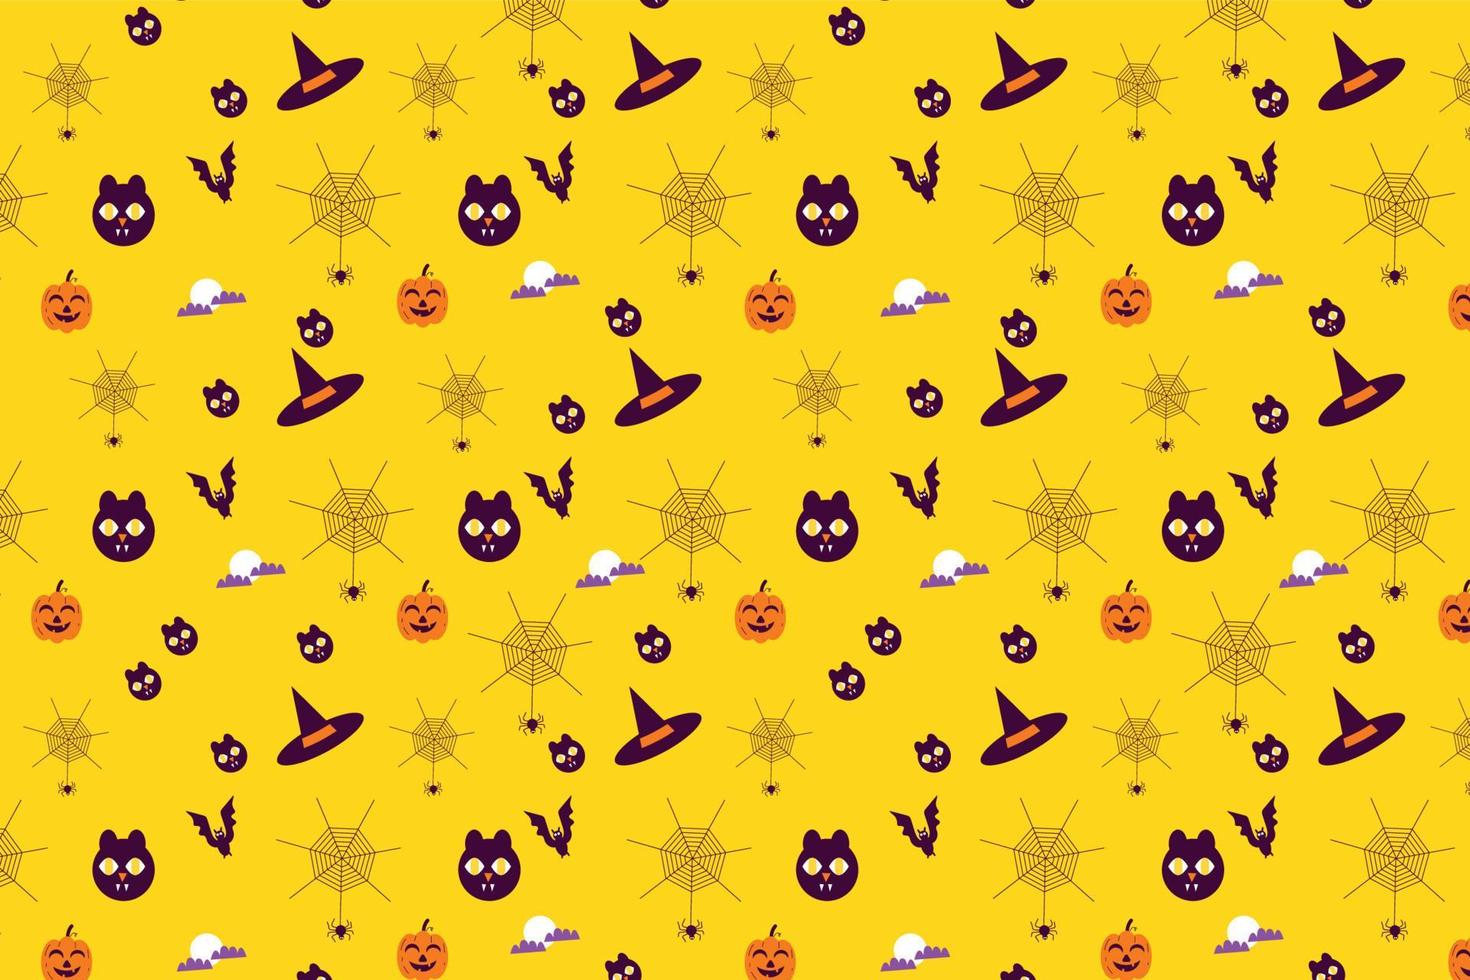 Halloween scary seamless pattern design with cat faces and witch hats. Abstract minimal pattern vector for Halloween event. Endless pattern with spider webs on a yellow background.